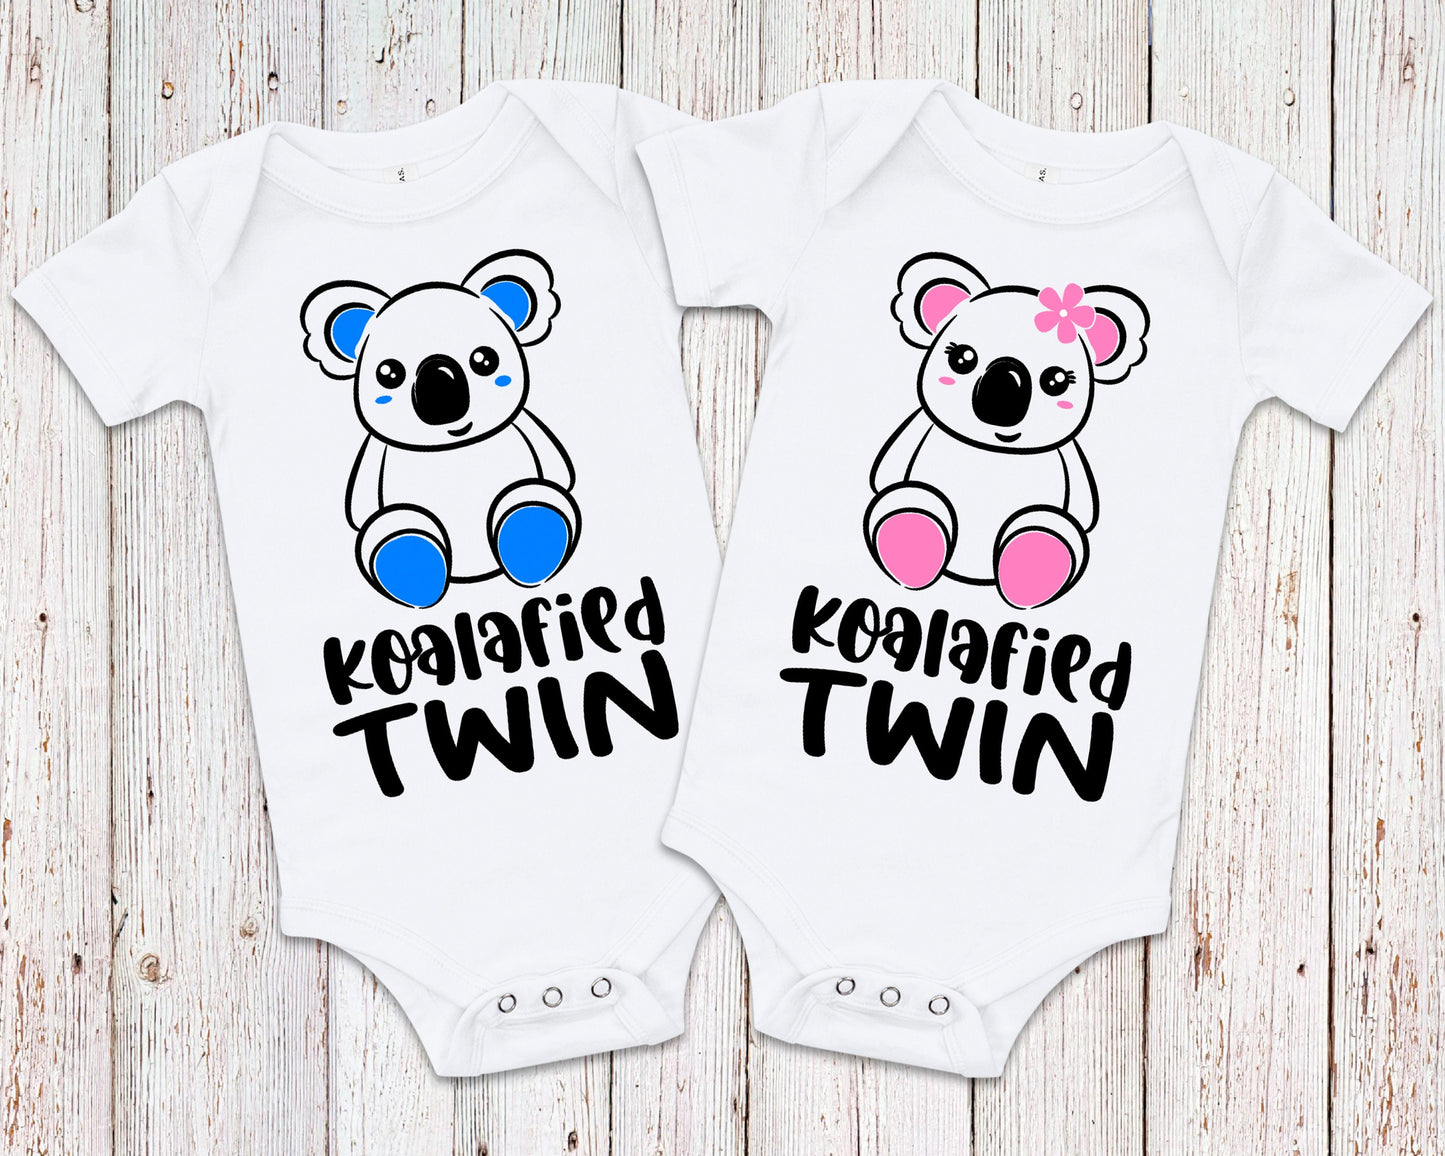 Koalafied Twin Boy Girl Twin T-Shirts or Bodysuits - Gift for Twins - Fraternal Twins - Matching Brother Sister Shirts - Twin Shirts